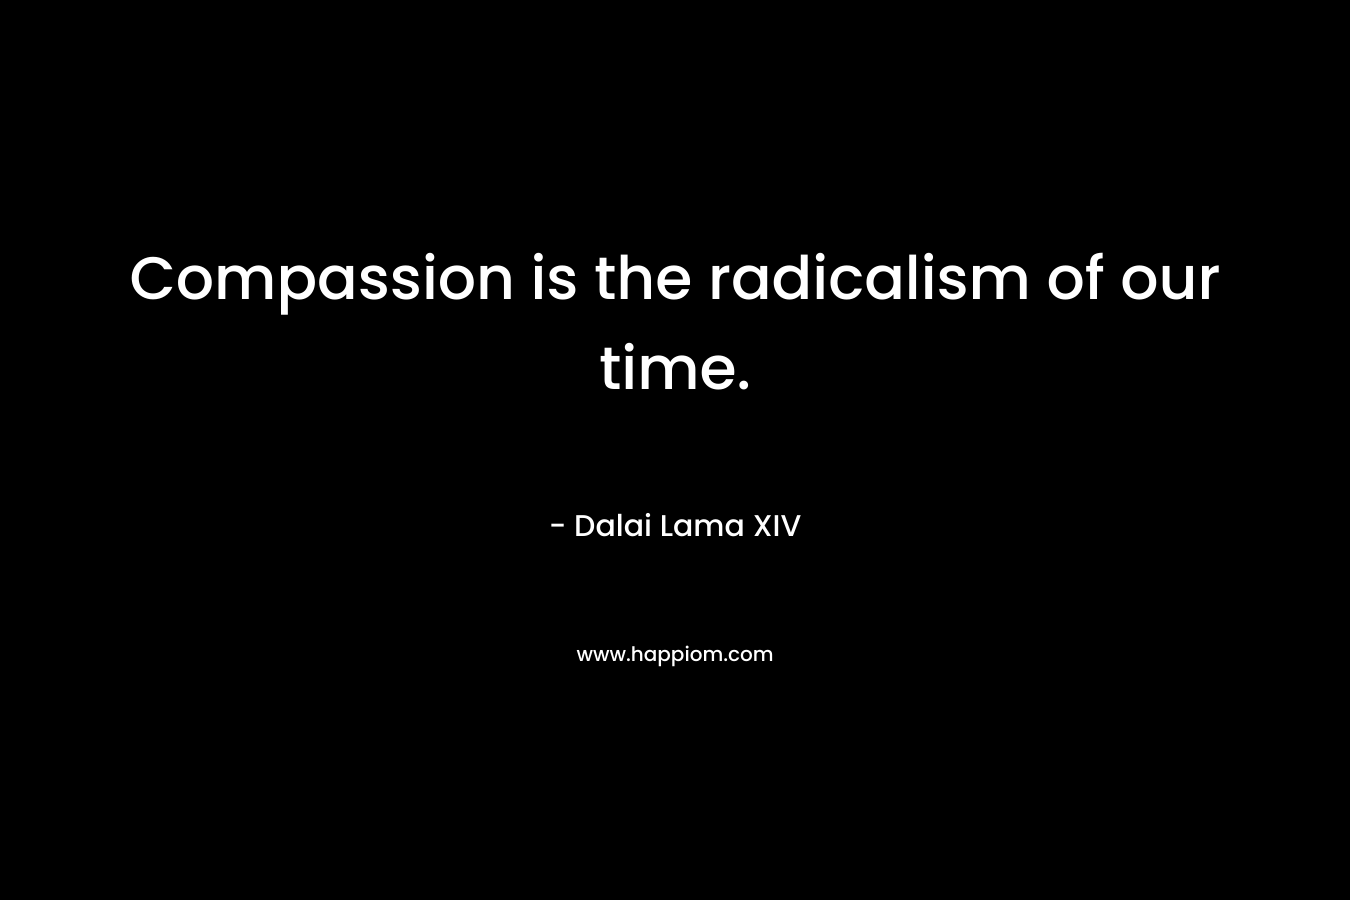 Compassion is the radicalism of our time.